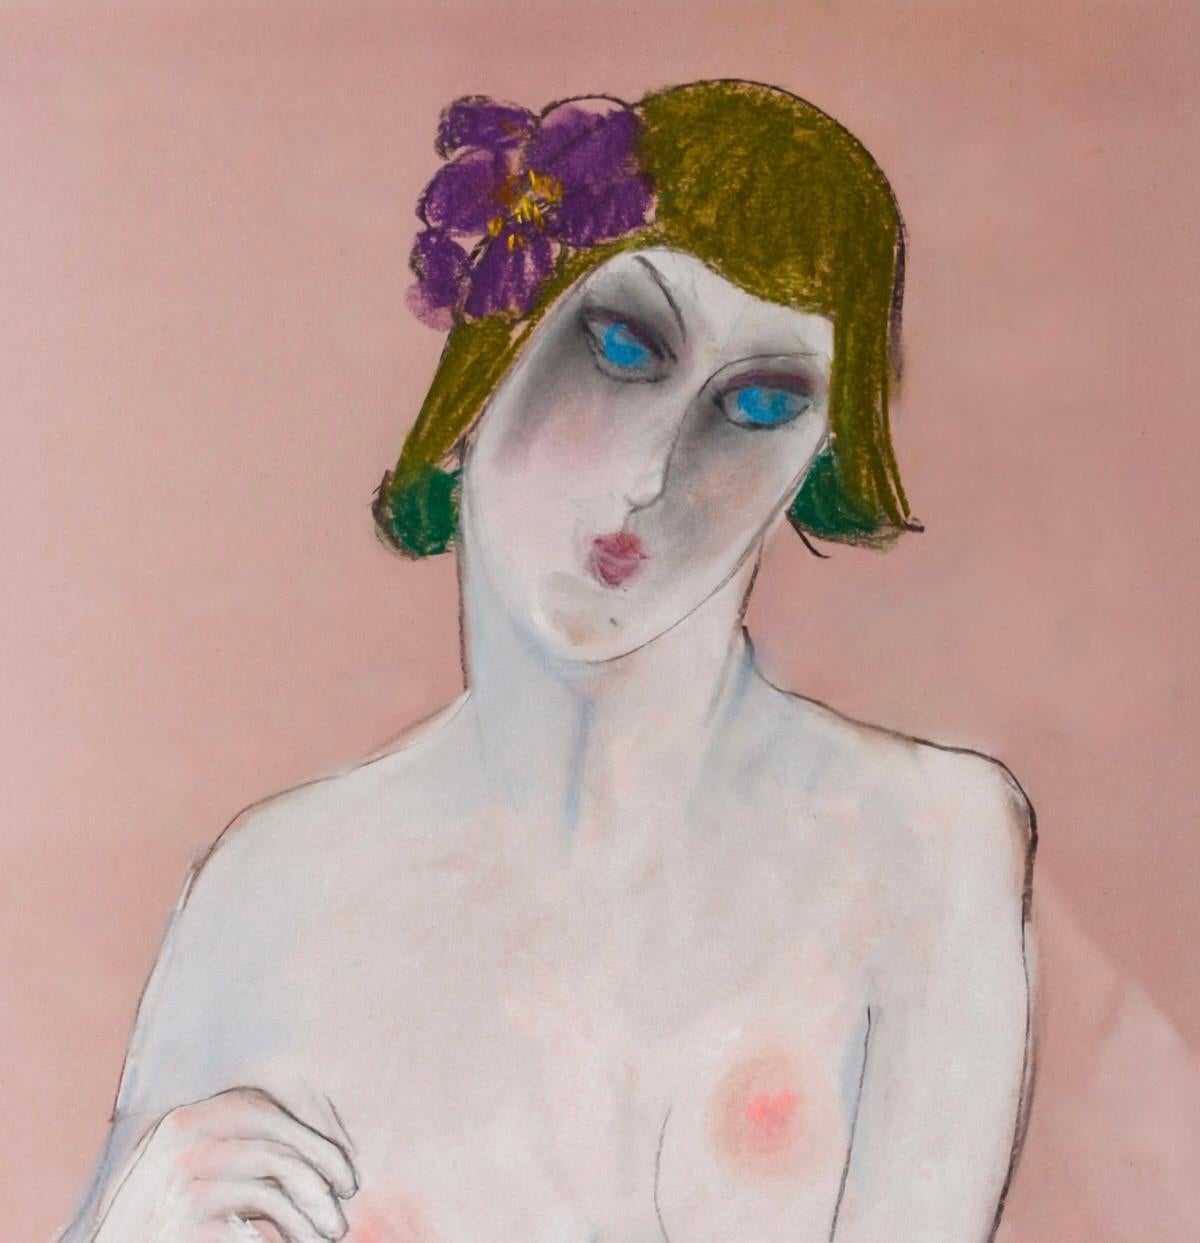 Oil pastel by Anna Sylverberg, part of a series of nudes, monogrammed AS, 1962.
Depiction of a nude woman seated in a languorous position, her face made up and her chestnut hair adorned with a mauve flower and green earrings.
The background is light